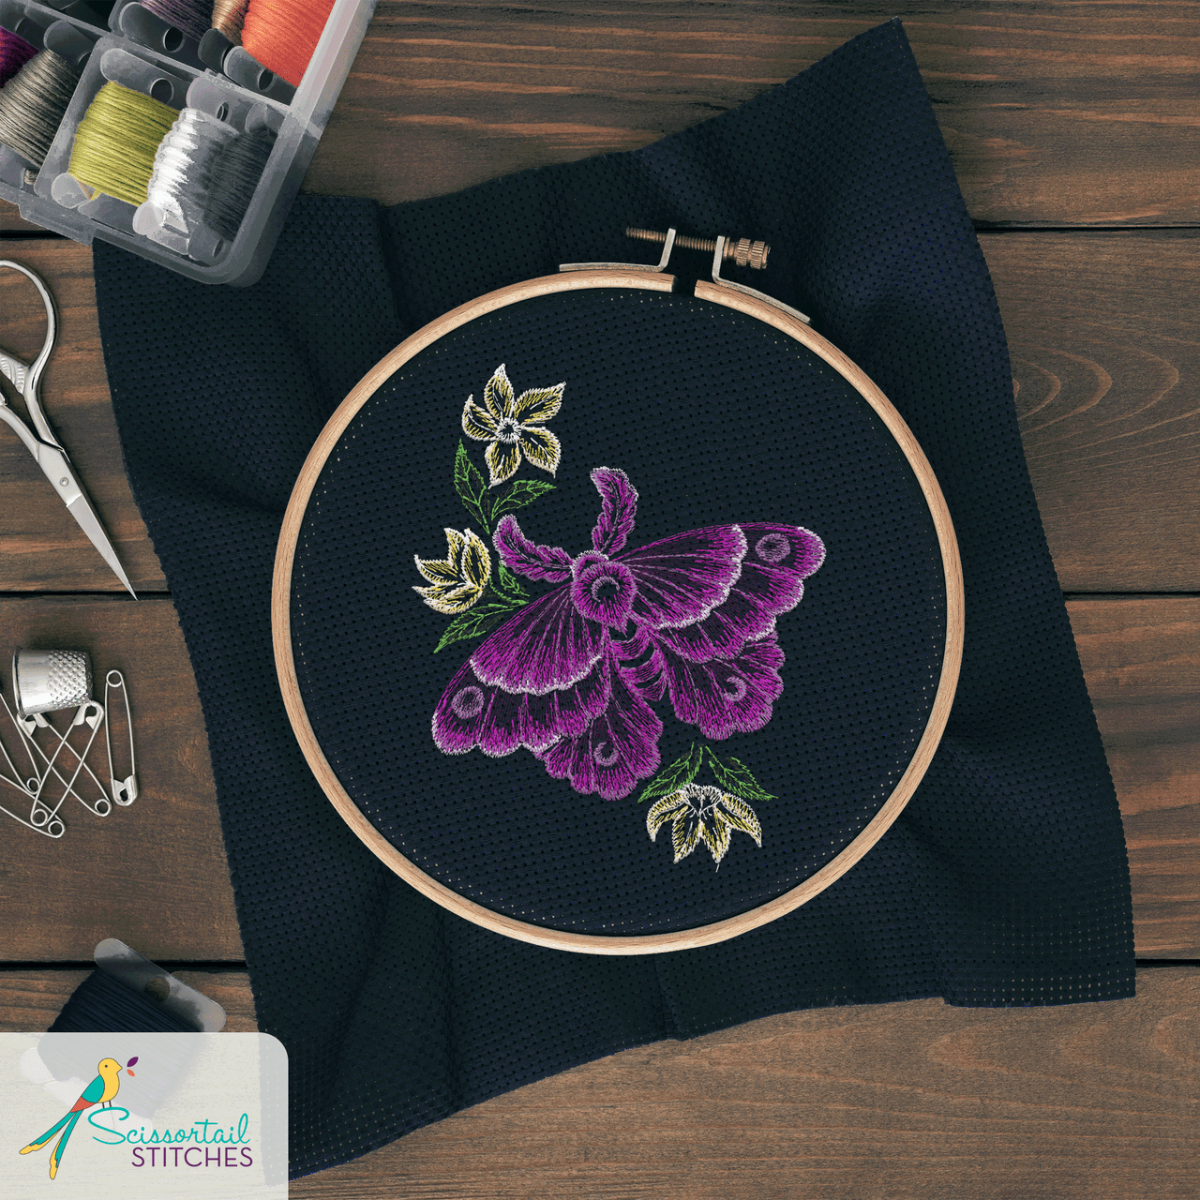 Moonlit Wings Embroidery Collection by Scissortail Stitches
,Moonlit Wings Embroidery Collection by Scissortail Stitches
,Moonlit Wings Embroidery Collection by Scissortail Stitches
,Moonlit Wings Embroidery Collection by Scissortail Stitches
